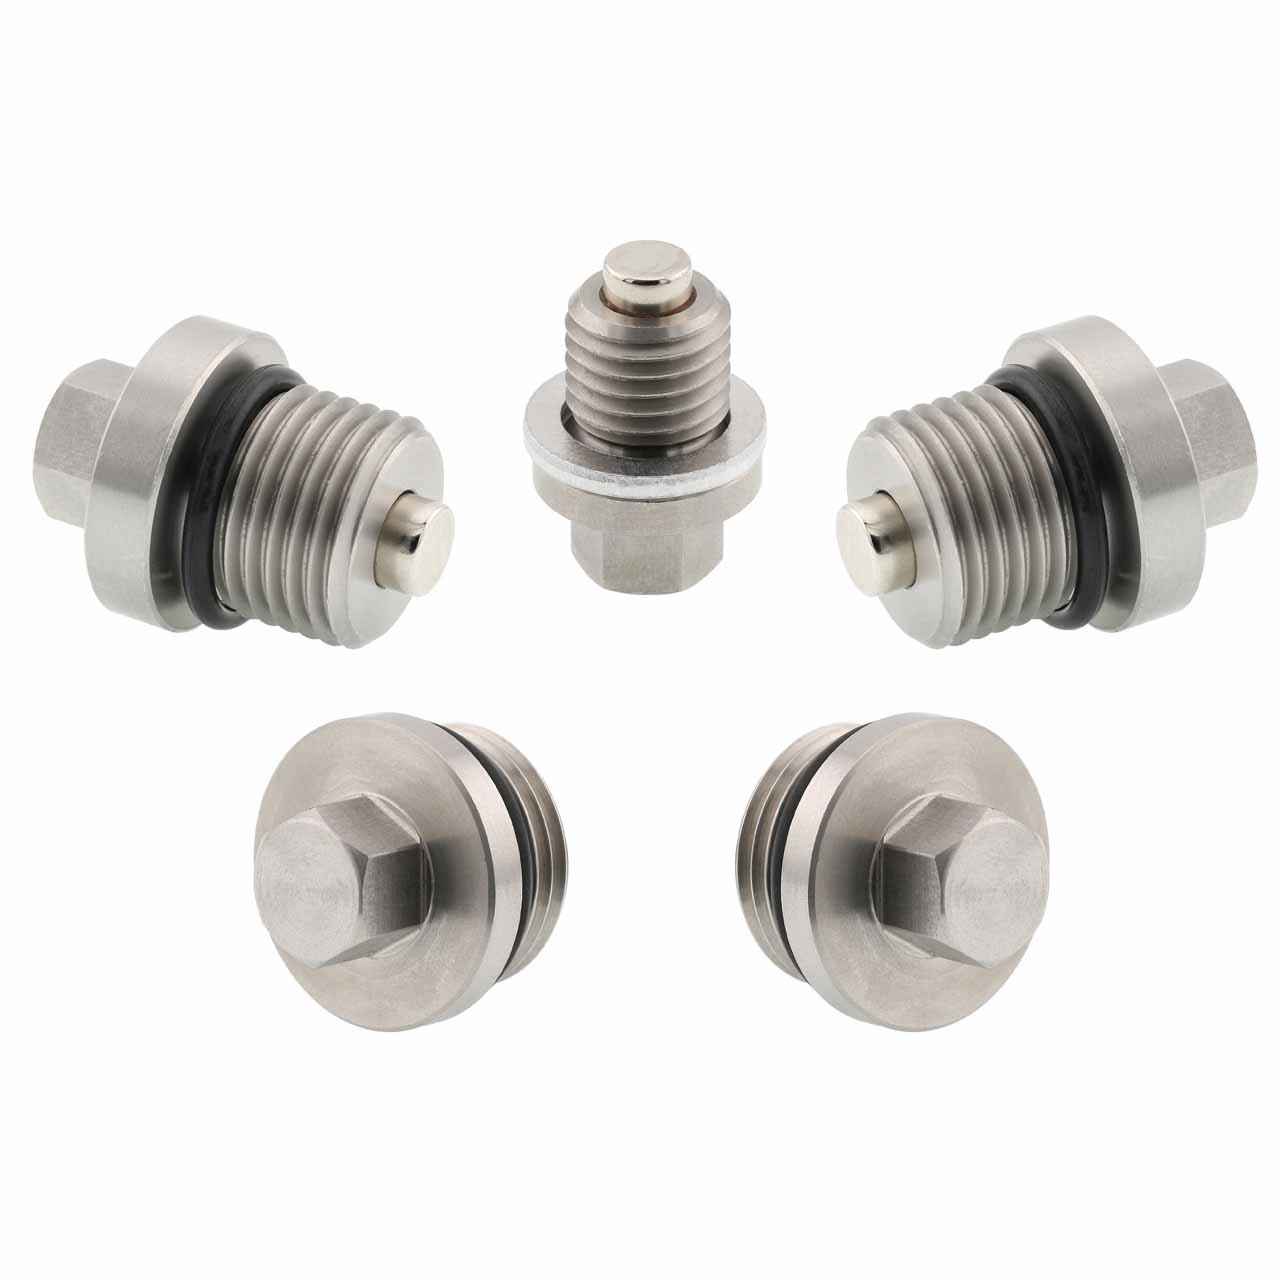 Polaris Ranger XP 1000 Trail Boss Magnetic Oil Drain Plug Kit - 2021-2022 - Engine, Transmission, Differential - Made In USA